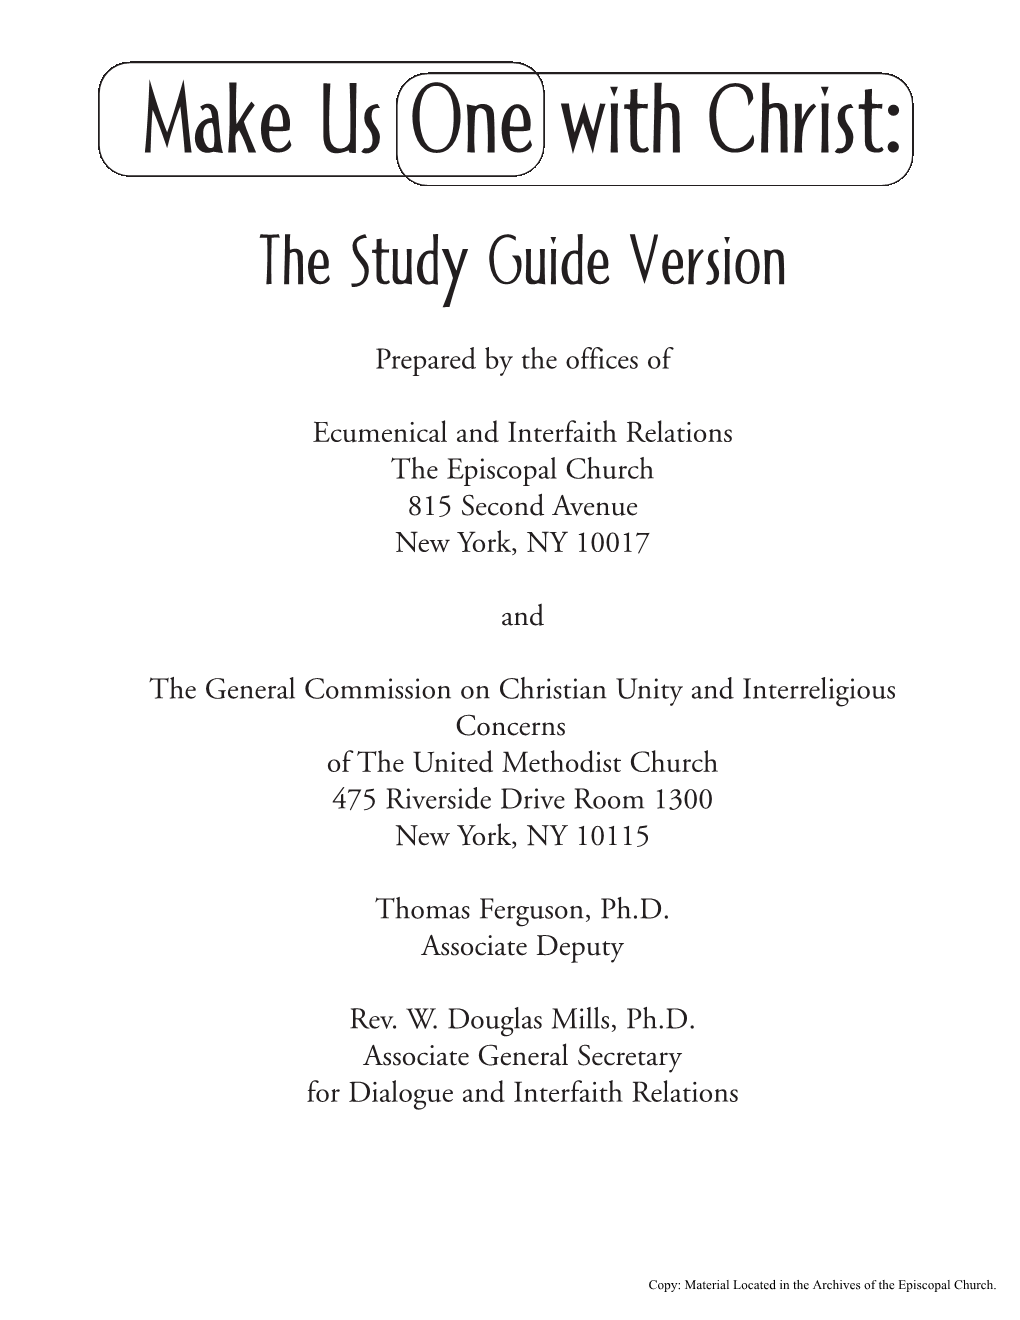 Make Us One with Christ: the Study Guide Version